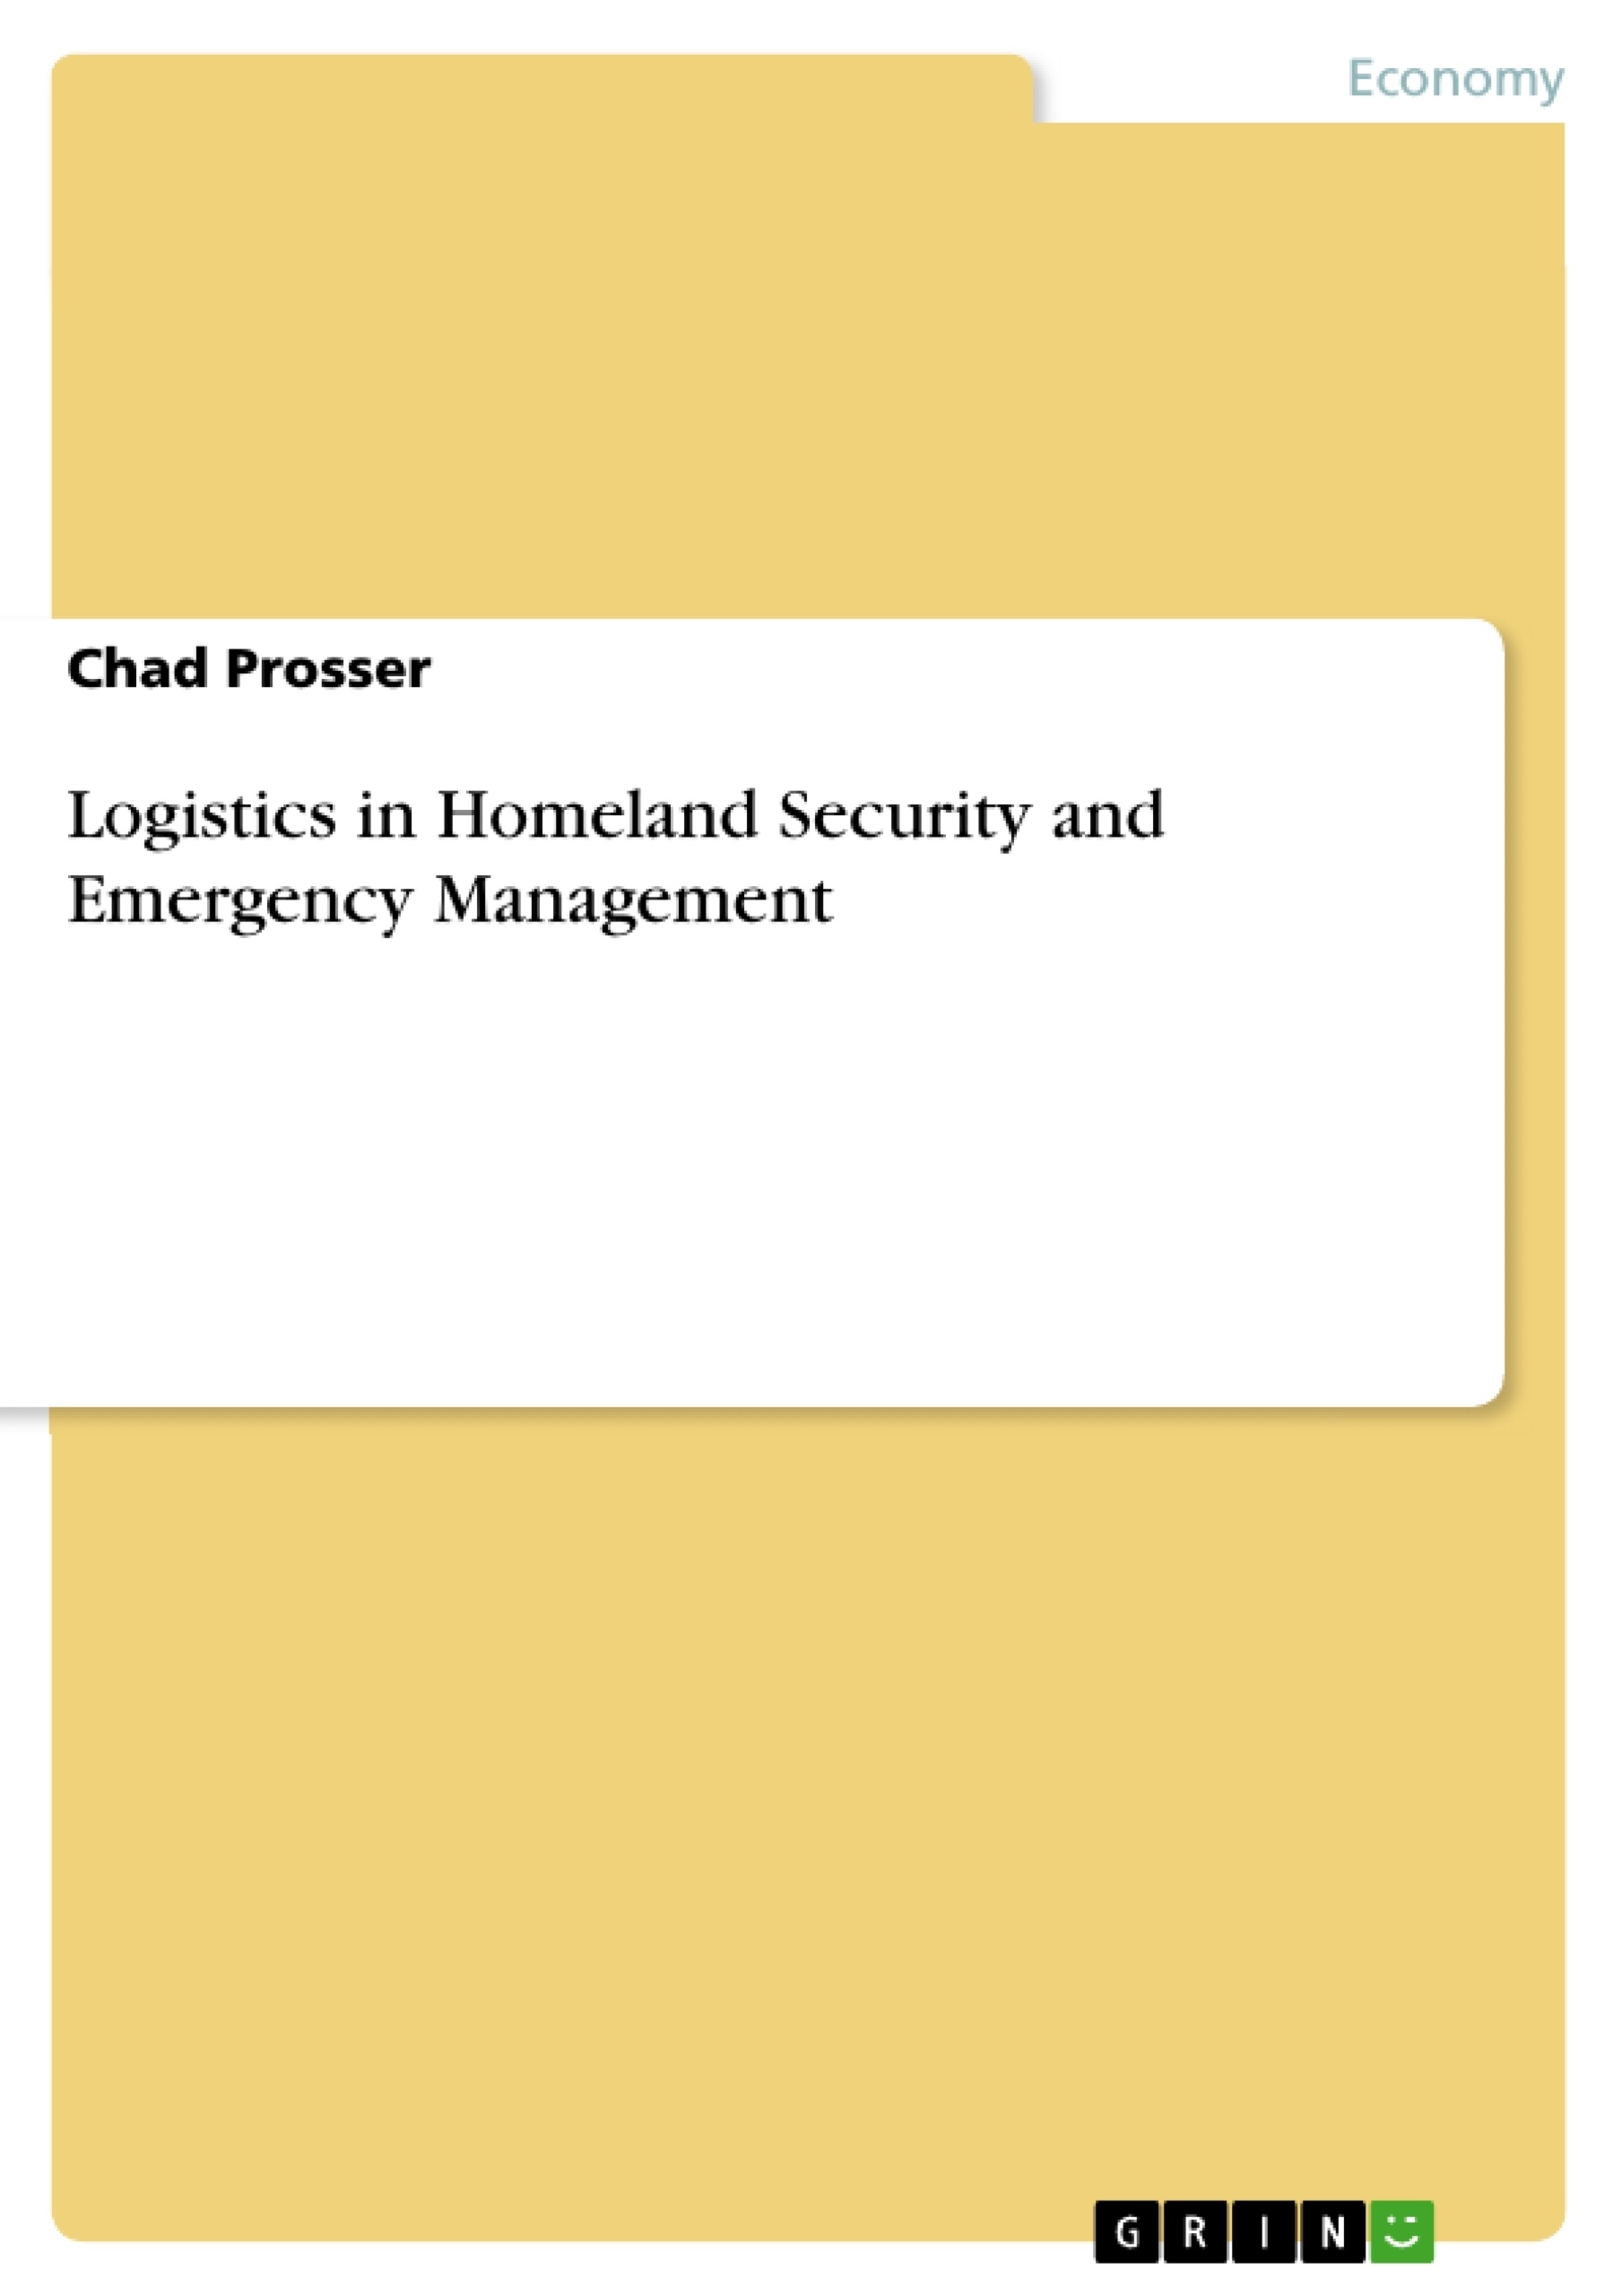 Título: Logistics in Homeland Security and Emergency Management